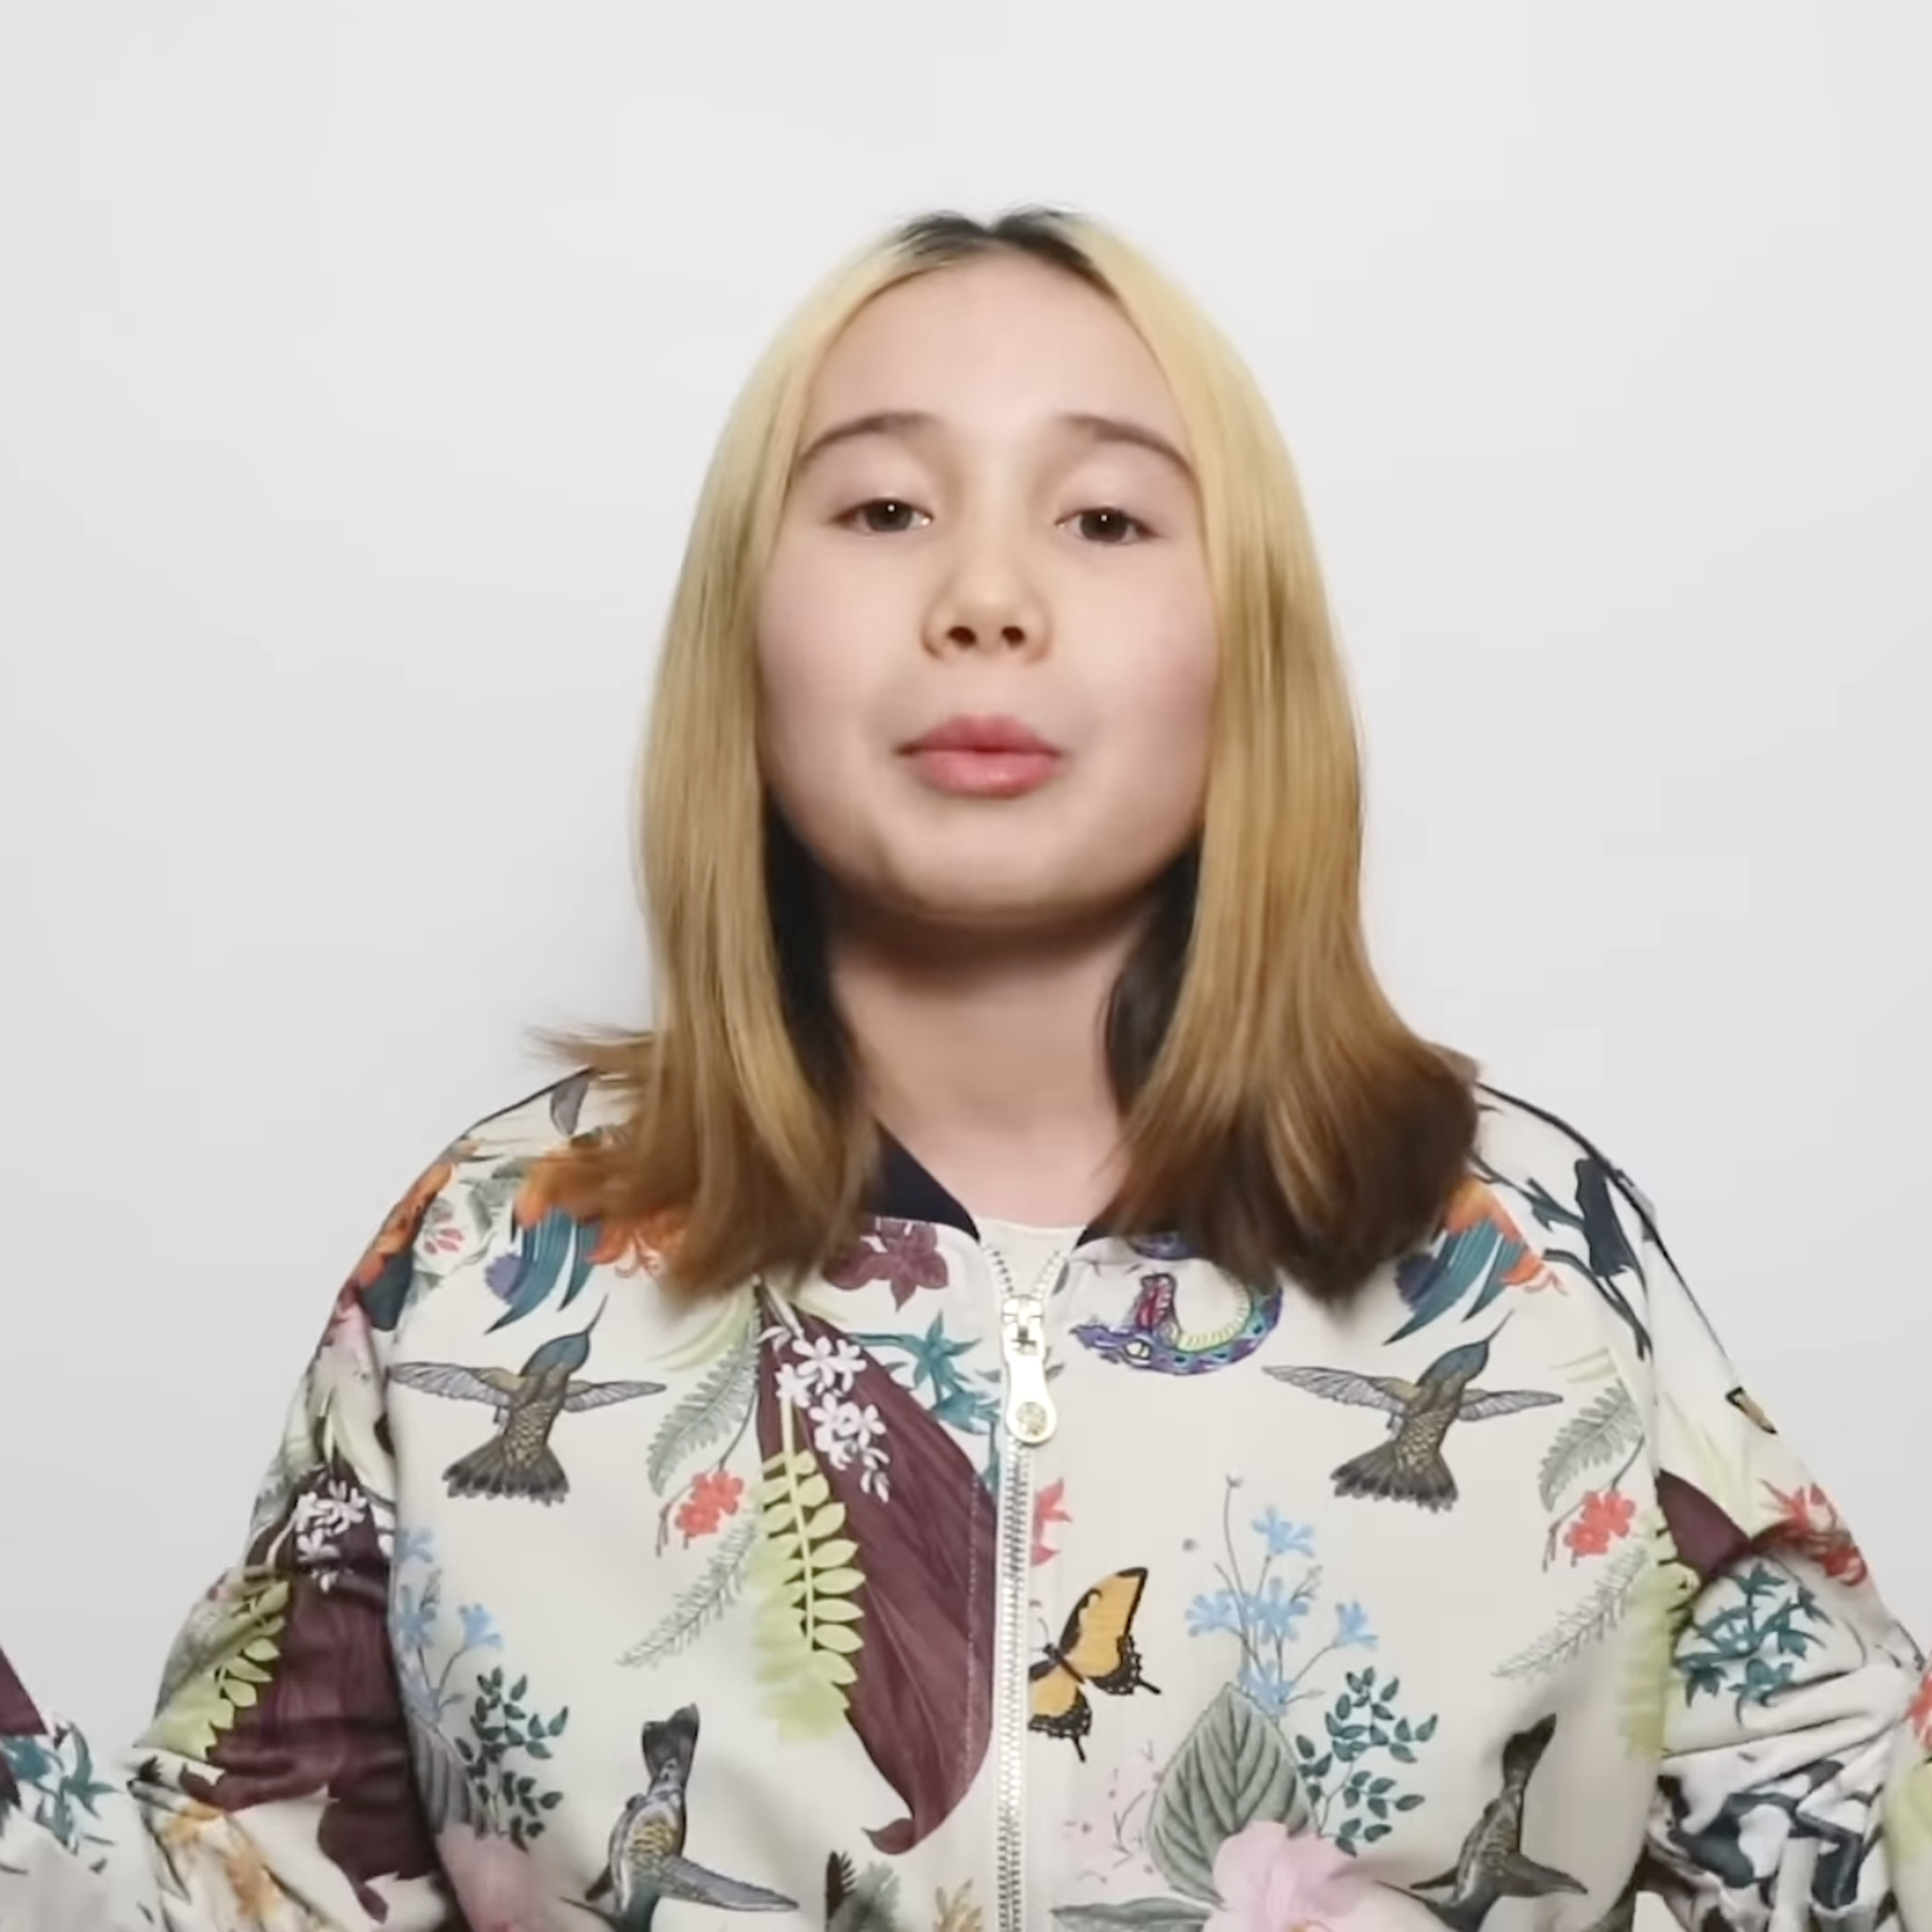 Lil Tay in 2018.